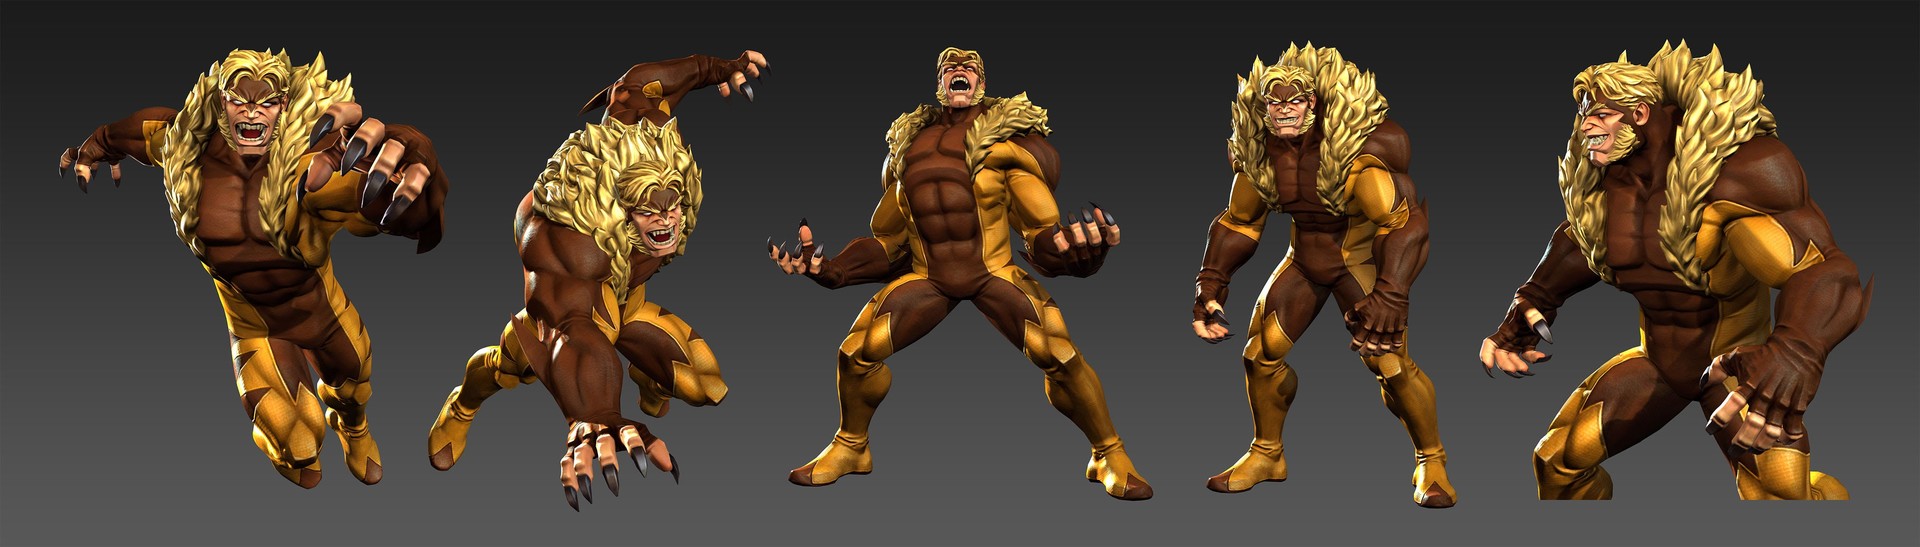 Marvel Contest Of Champions Sabretooth - HD Wallpaper 